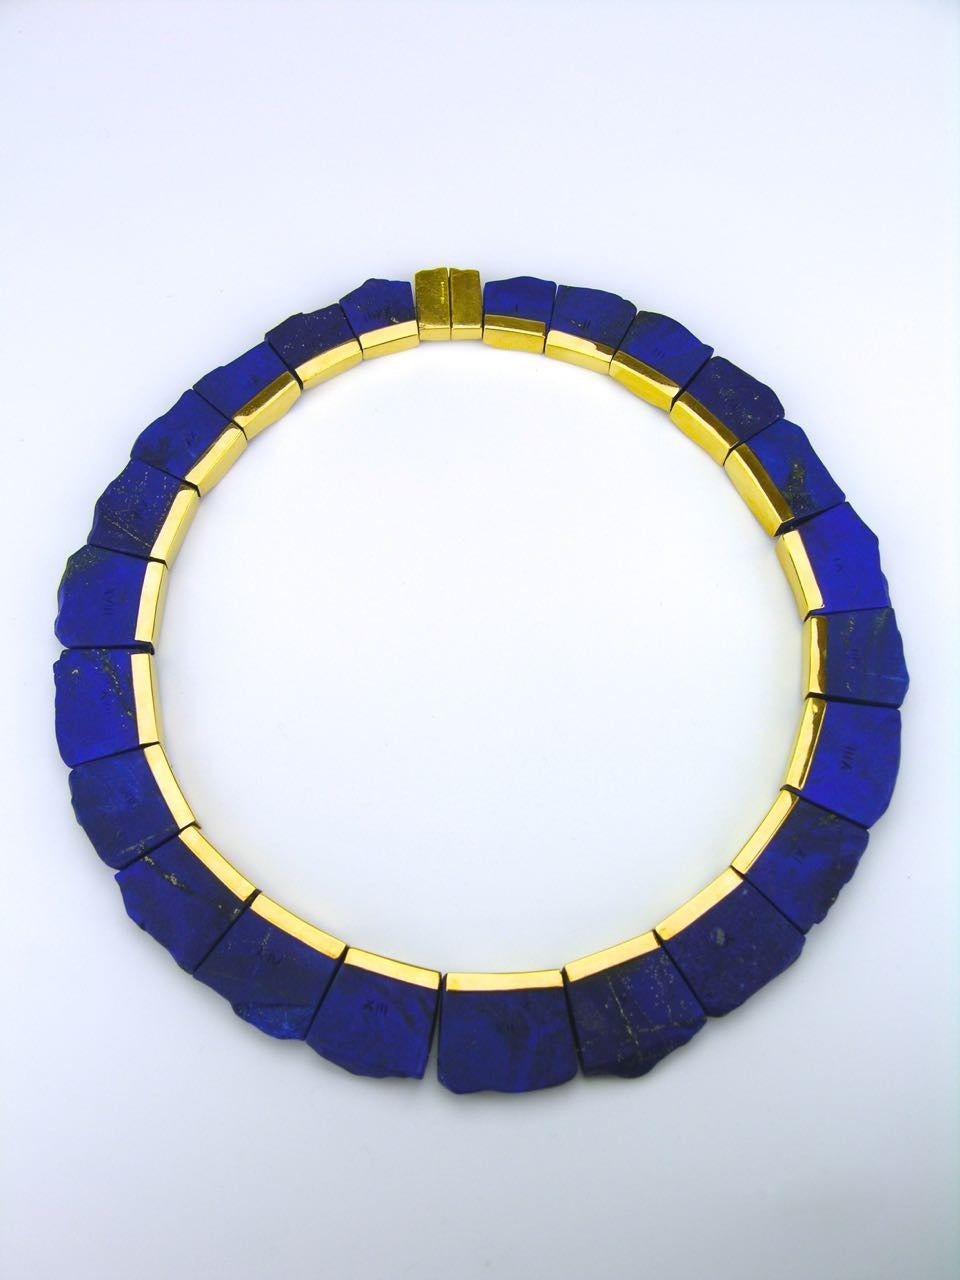 An 18ct yellow gold and lapis lazuli collier necklace composed of 